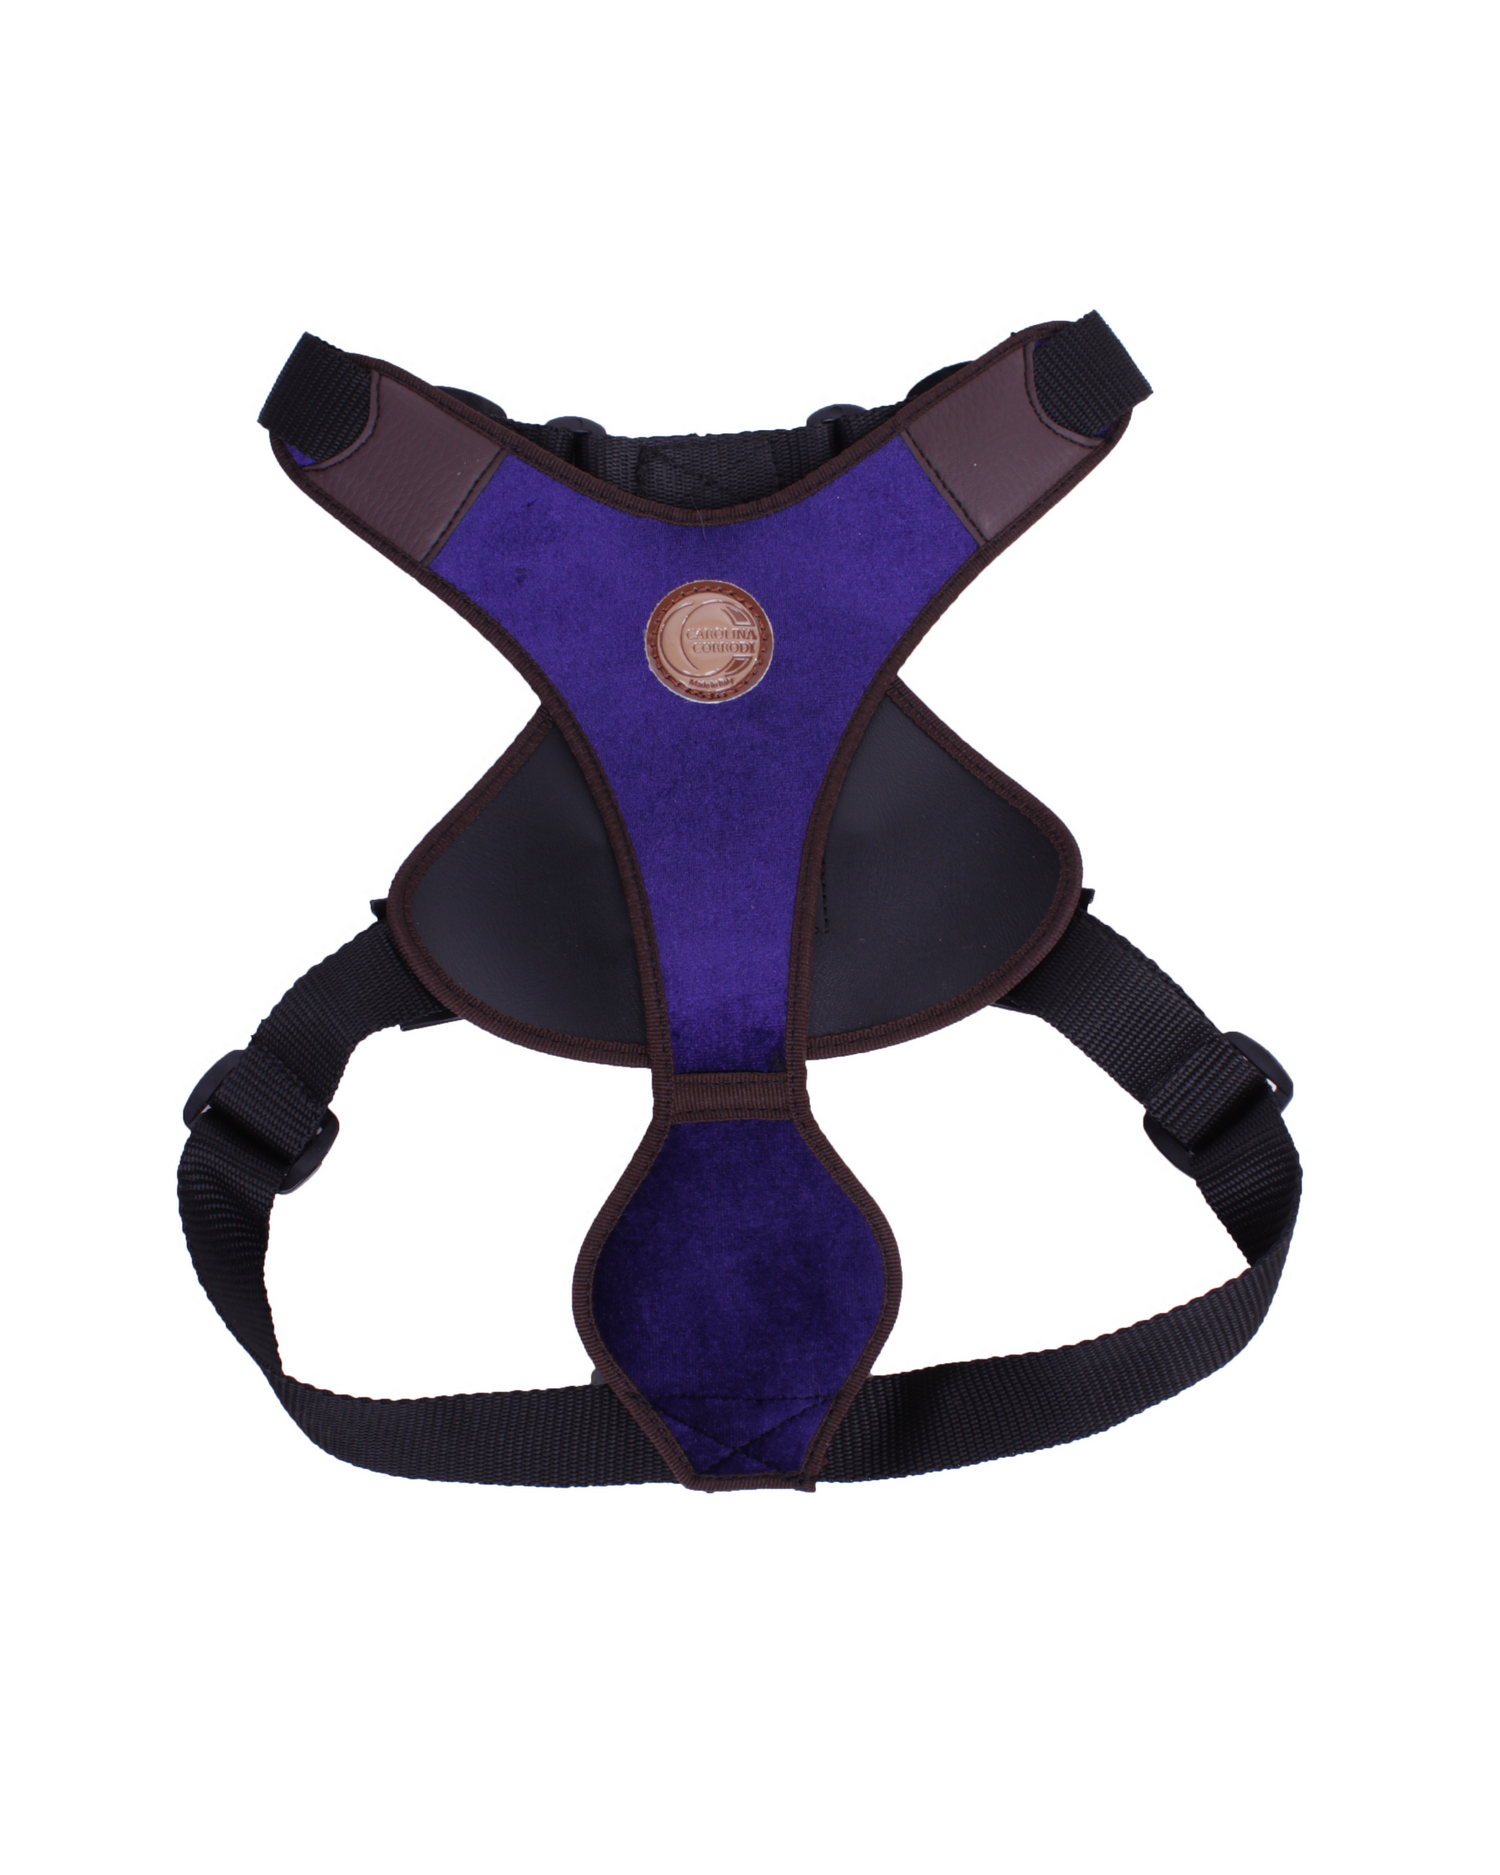 Dog harness with matching leash